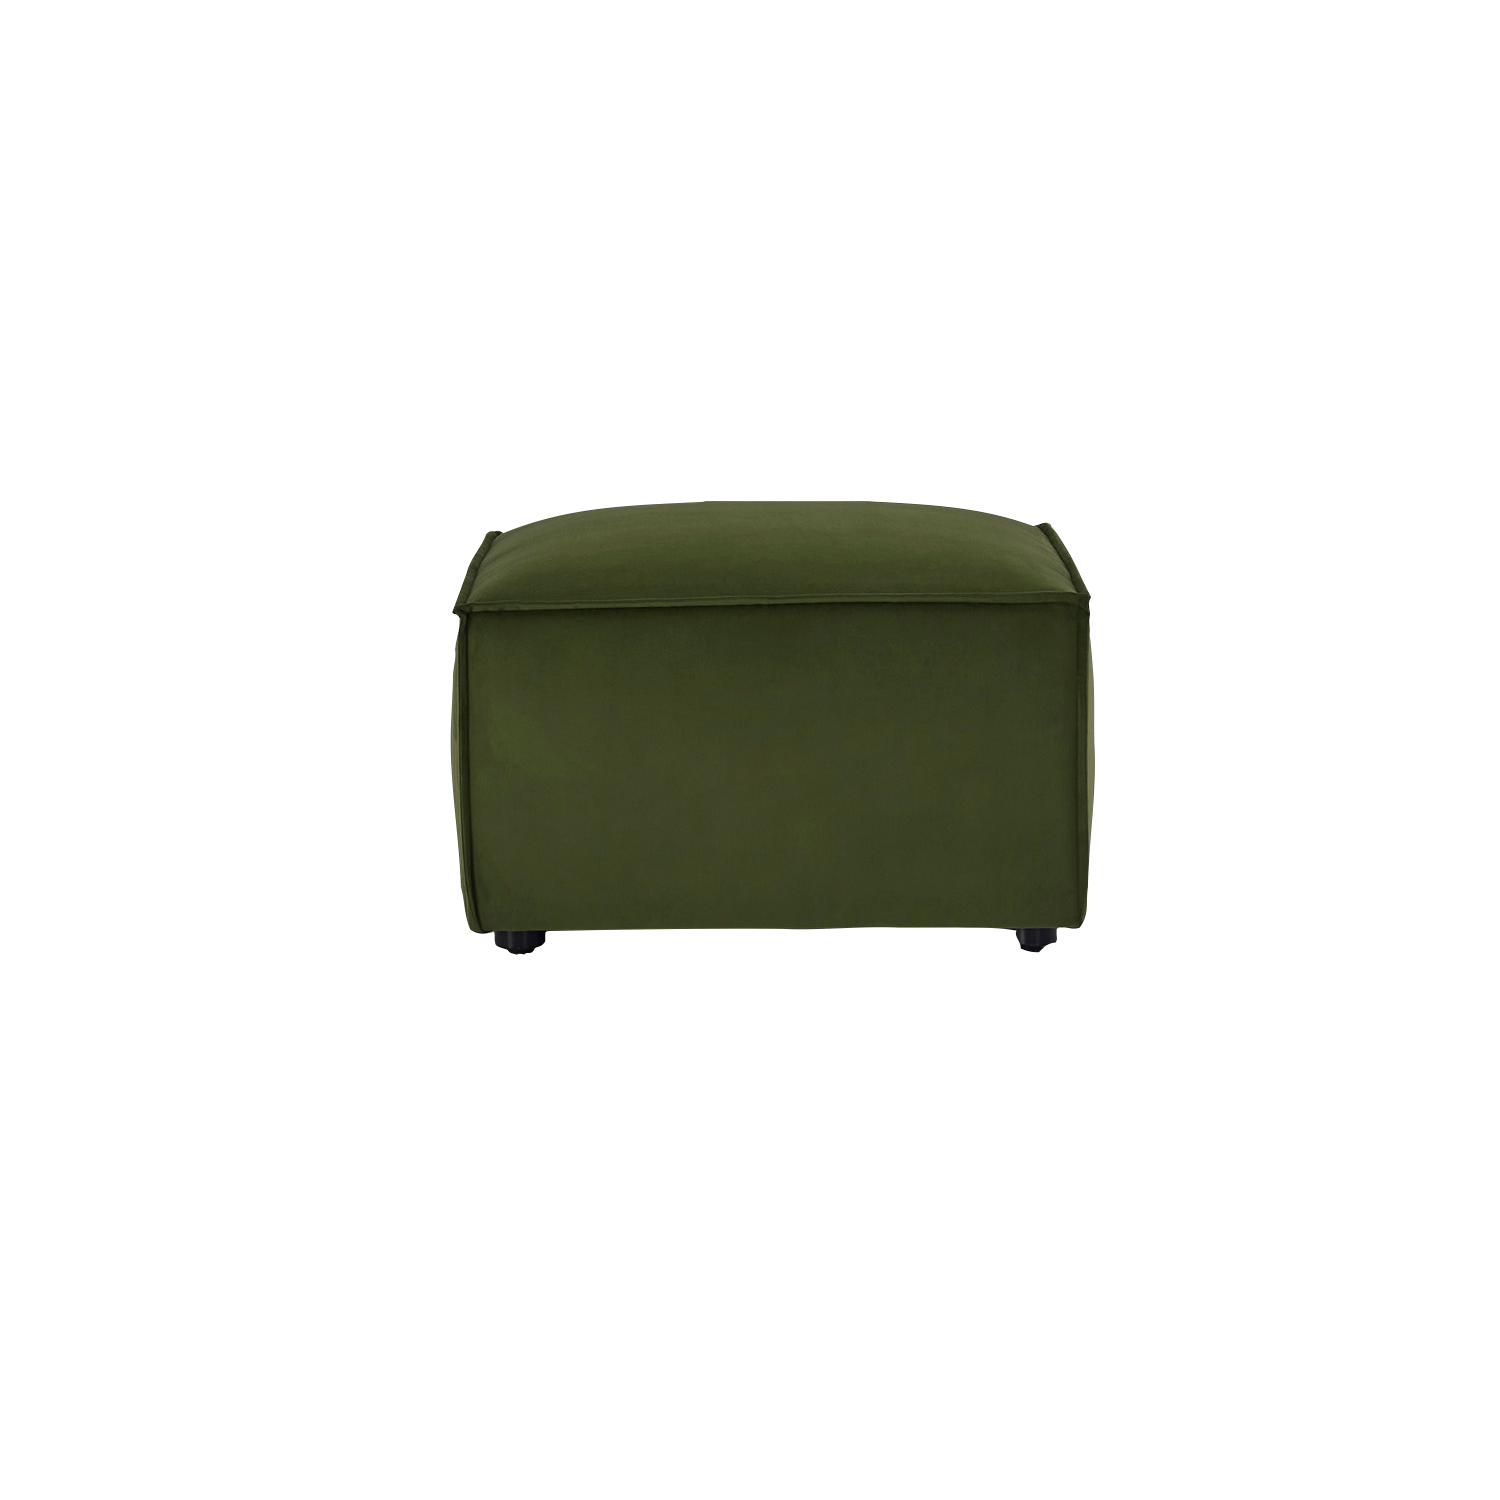 Swyft Model 03 Ottoman - 48HR DELIVERY